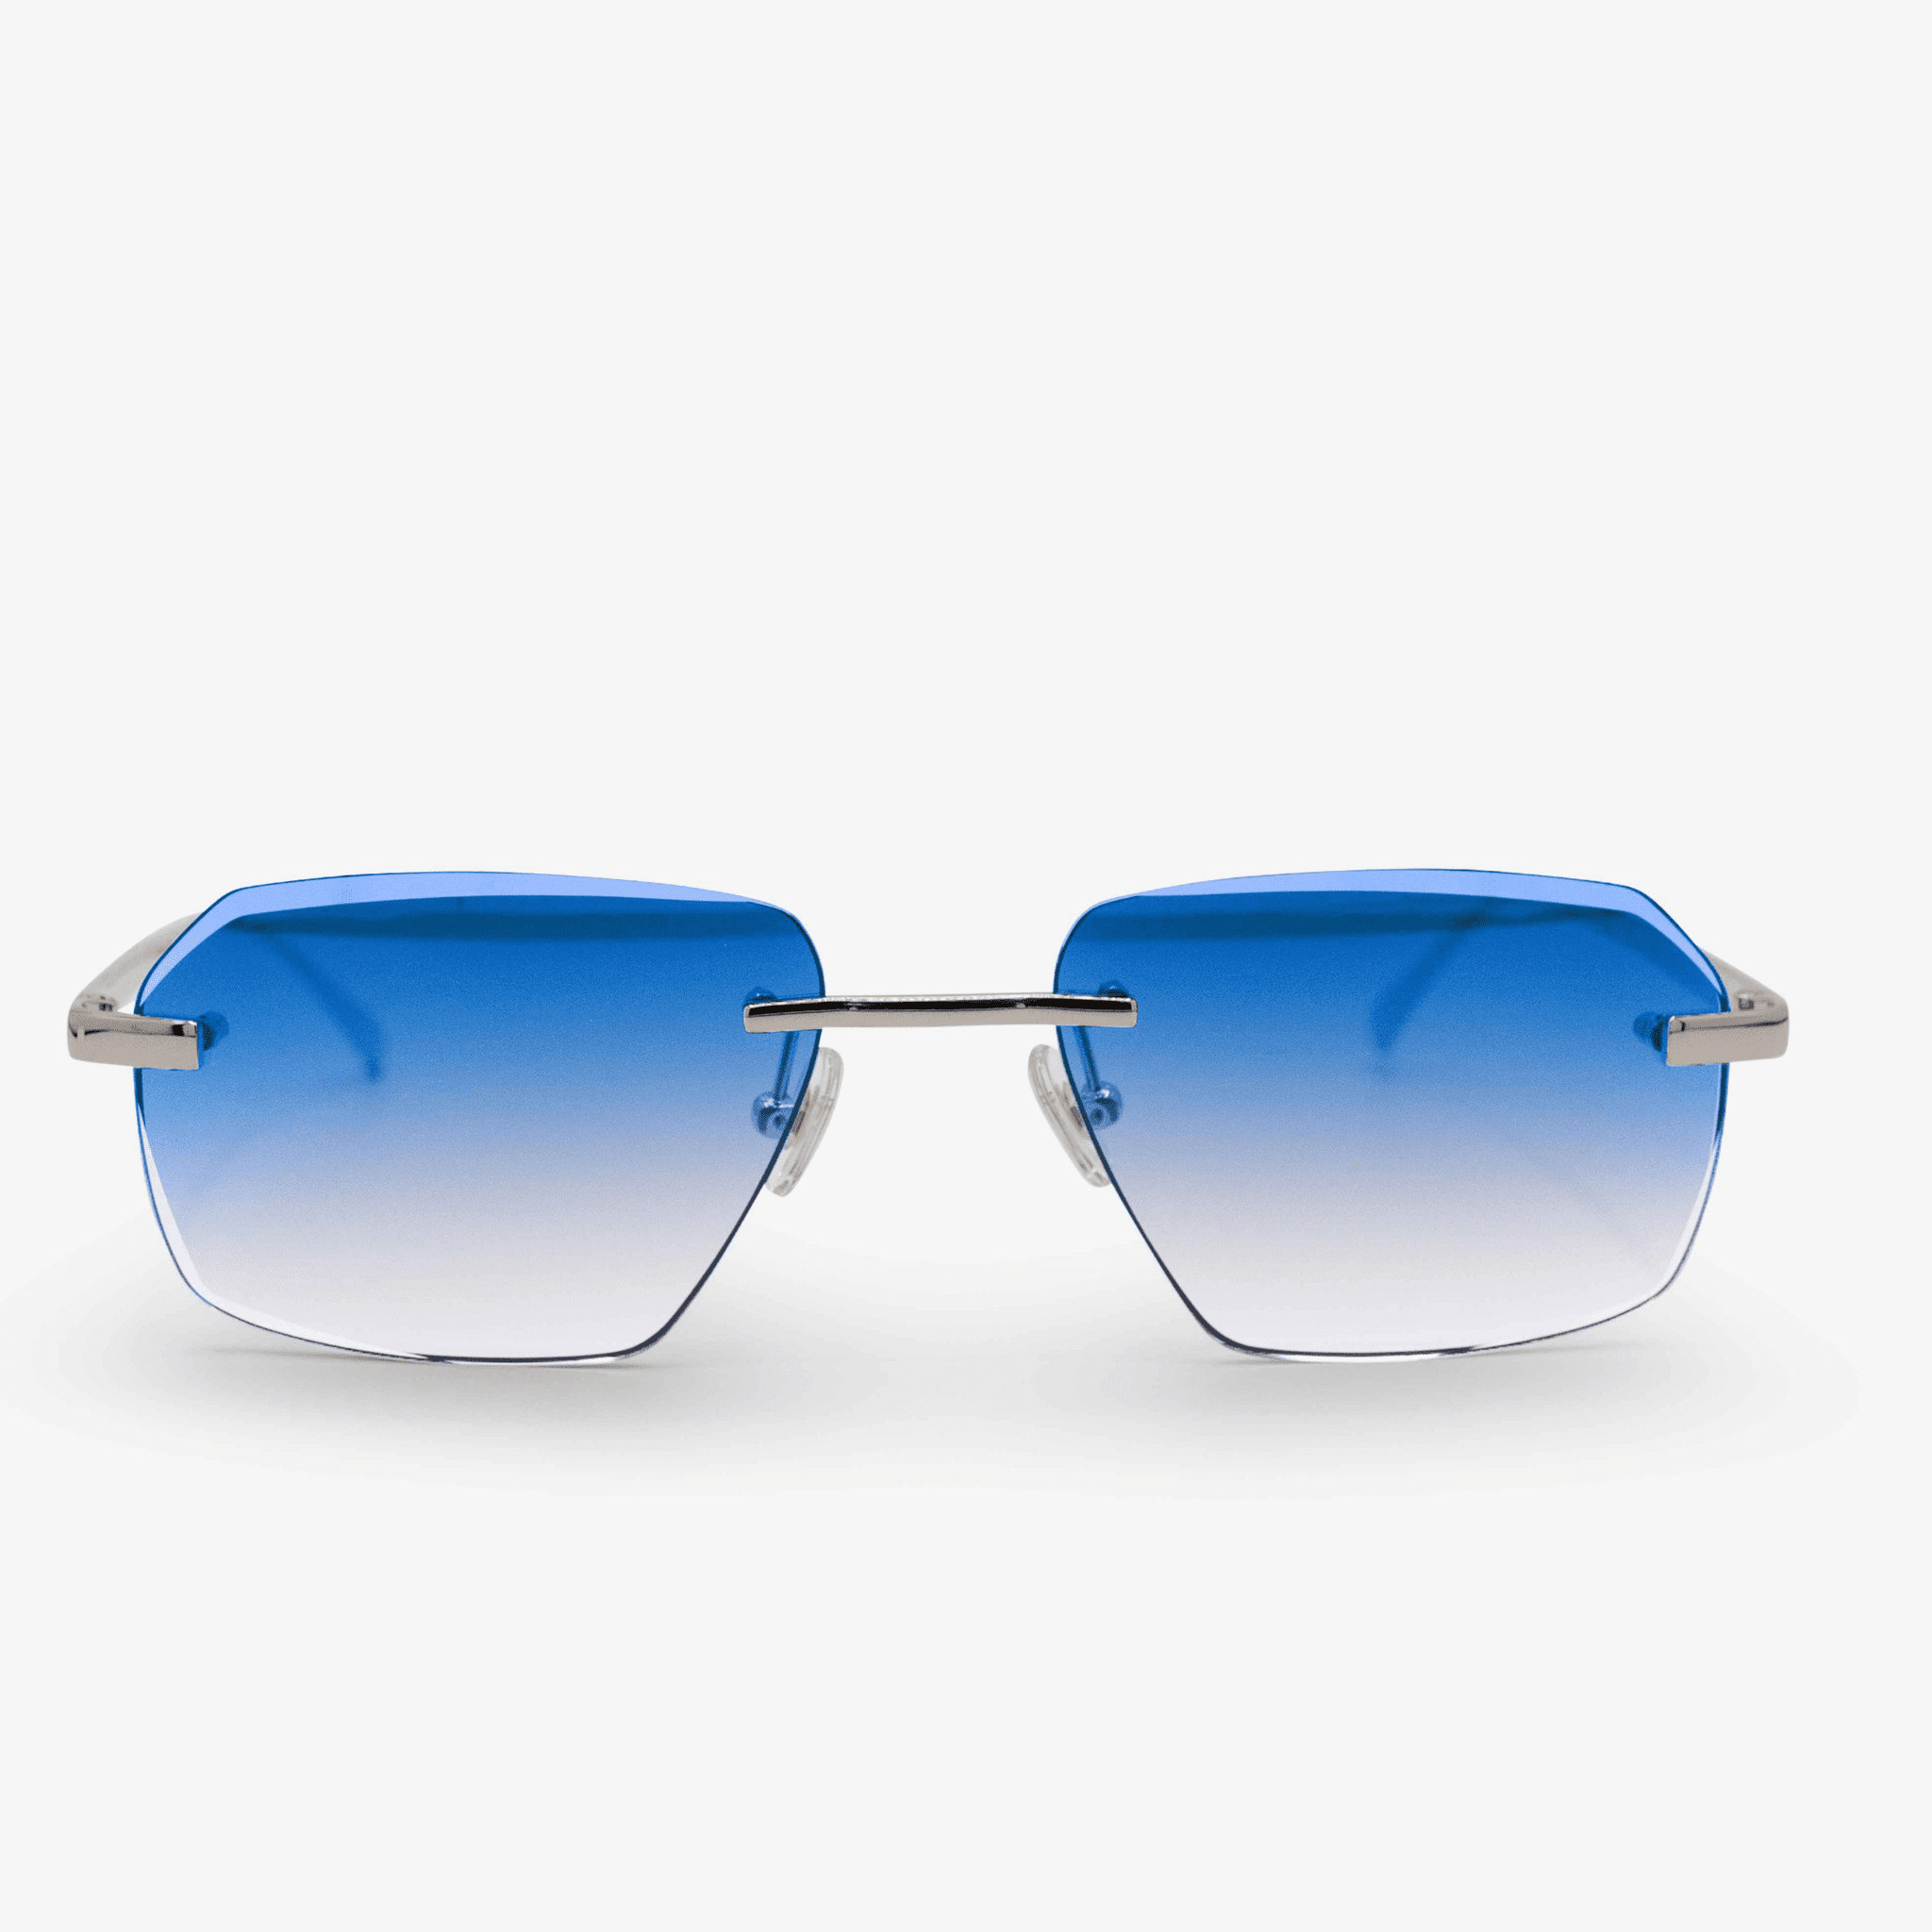 Sancy rimless glasses showcasing a diamond cut design with onyx blue lenses complemented by sterling silver frame accents, presented in a clean and clear front view against a white background.